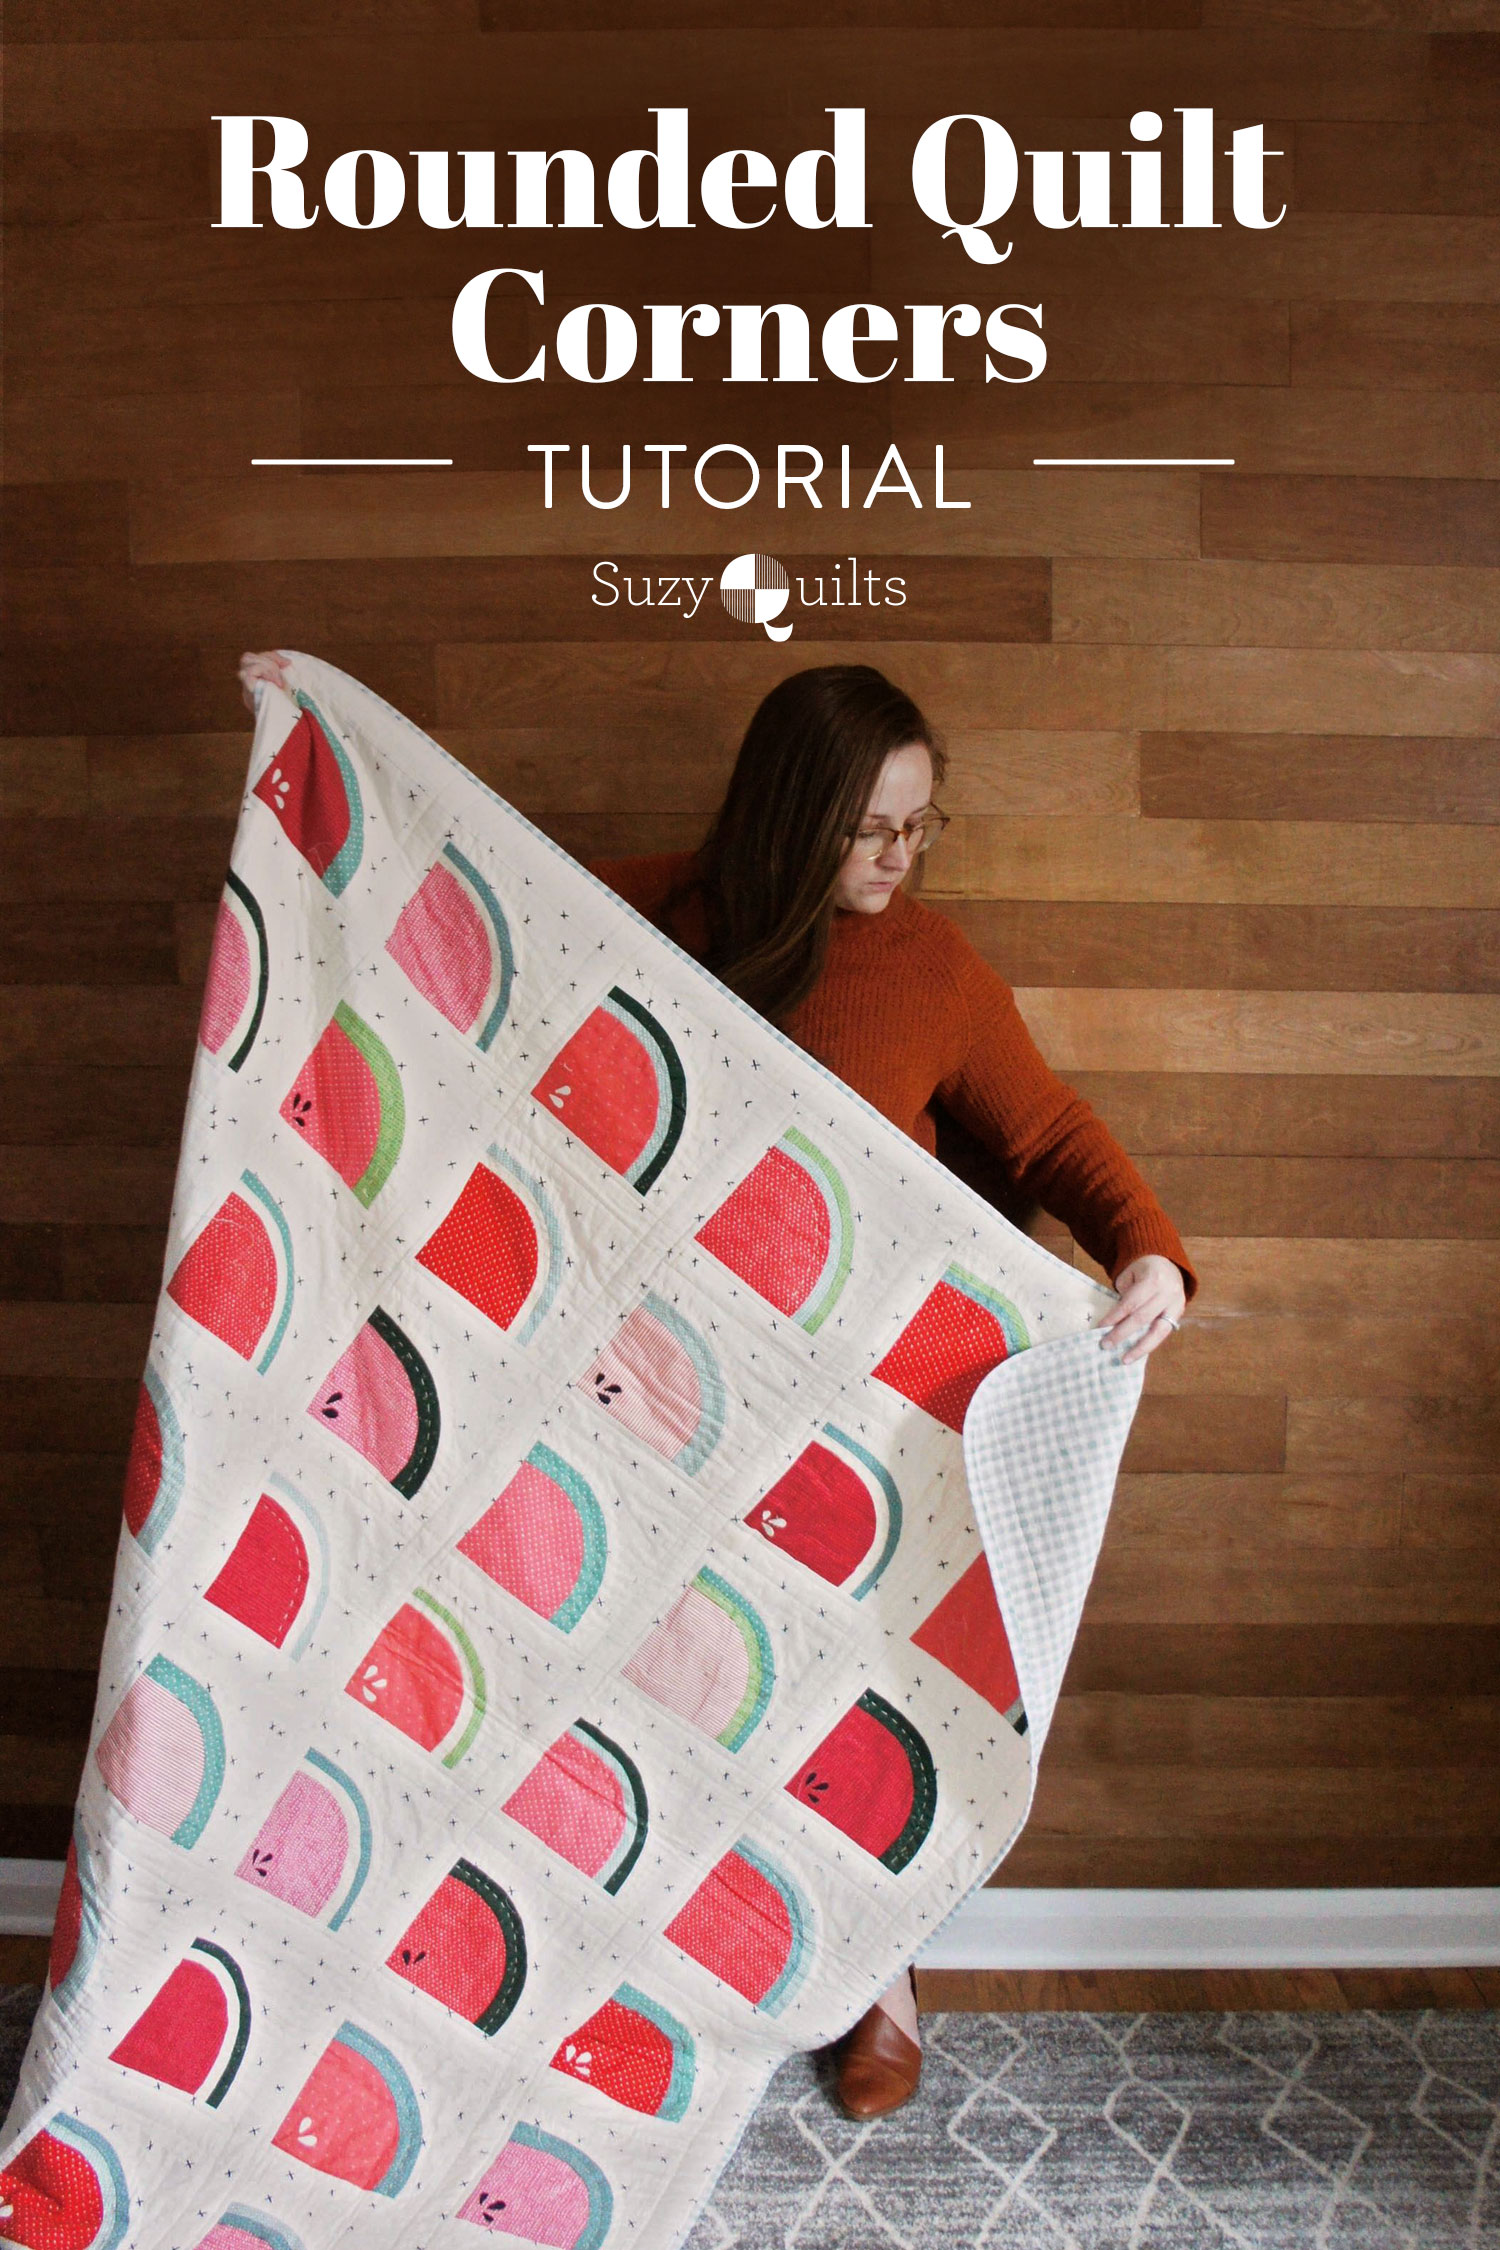 A step by step tutorial including photos and all the tools you need to get perfectly rounded quilt corners. Learn the best tips and tricks for rounding the corners of any quilt project and attaching a smooth binding. suzyquilts.com #sewingdiy #quilting